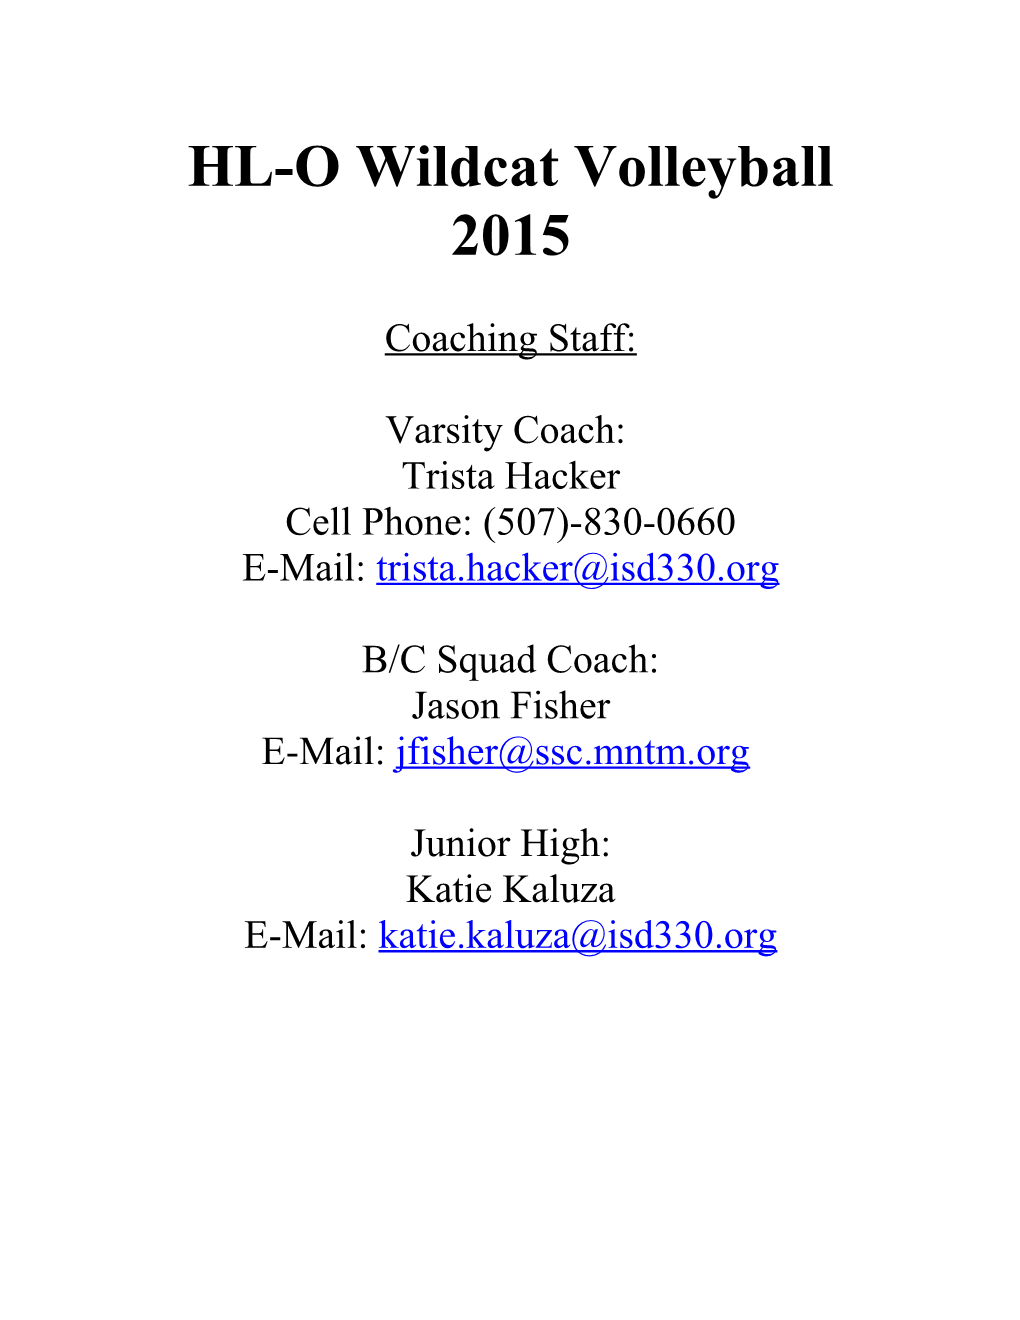 HL-O Wildcat Volleyball